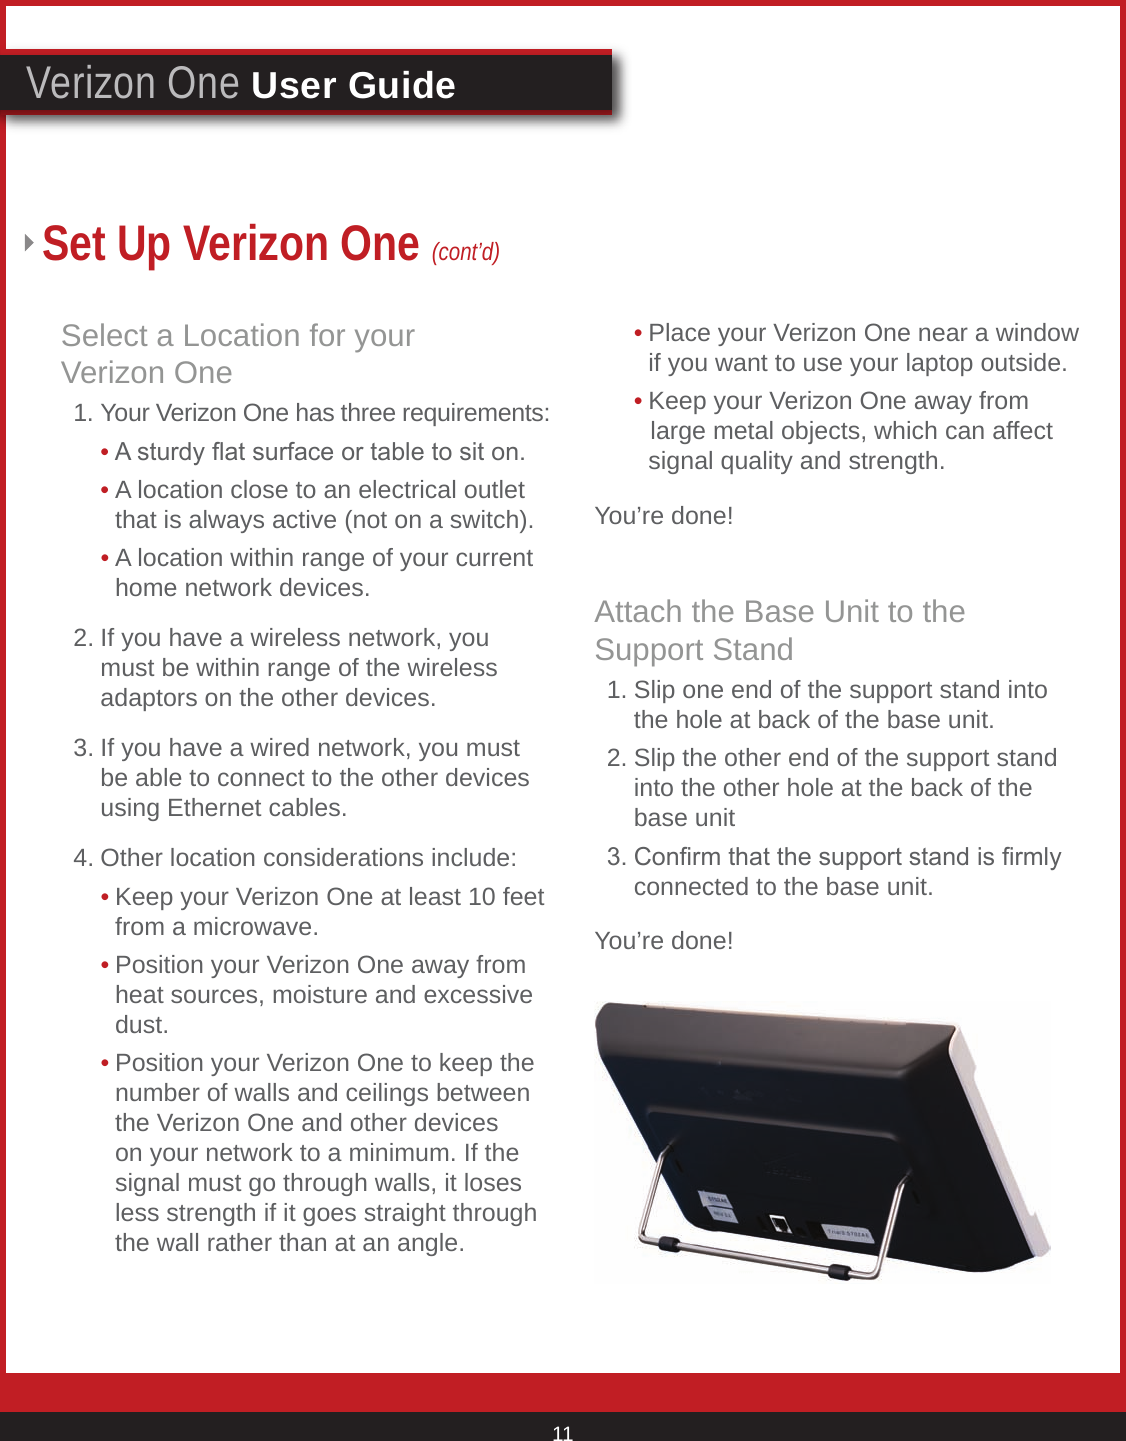 © 2007 Verizon. All Rights Reserved. 11Verizon One User GuideSet Up Verizon One (cont’d)Select a Location for your  Verizon One  1. Your Verizon One has three requirements:     • A sturdy at surface or table to sit on.     • A location close to an electrical outlet        that is always active (not on a switch).     • A location within range of your current        home network devices.   2. If you have a wireless network, you      must be within range of the wireless      adaptors on the other devices.   3. If you have a wired network, you must      be able to connect to the other devices      using Ethernet cables.   4. Other location considerations include:     • Keep your Verizon One at least 10 feet        from a microwave.     • Position your Verizon One away from        heat sources, moisture and excessive        dust.     • Position your Verizon One to keep the        number of walls and ceilings between        the Verizon One and other devices        on your network to a minimum. If the        signal must go through walls, it loses        less strength if it goes straight through        the wall rather than at an angle.     • Place your Verizon One near a window        if you want to use your laptop outside.     • Keep your Verizon One away from         large metal objects, which can affect        signal quality and strength.You’re done!Attach the Base Unit to the  Support Stand  1. Slip one end of the support stand into      the hole at back of the base unit.  2. Slip the other end of the support stand      into the other hole at the back of the      base unit  3. Conrm that the support stand is rmly      connected to the base unit.You’re done!